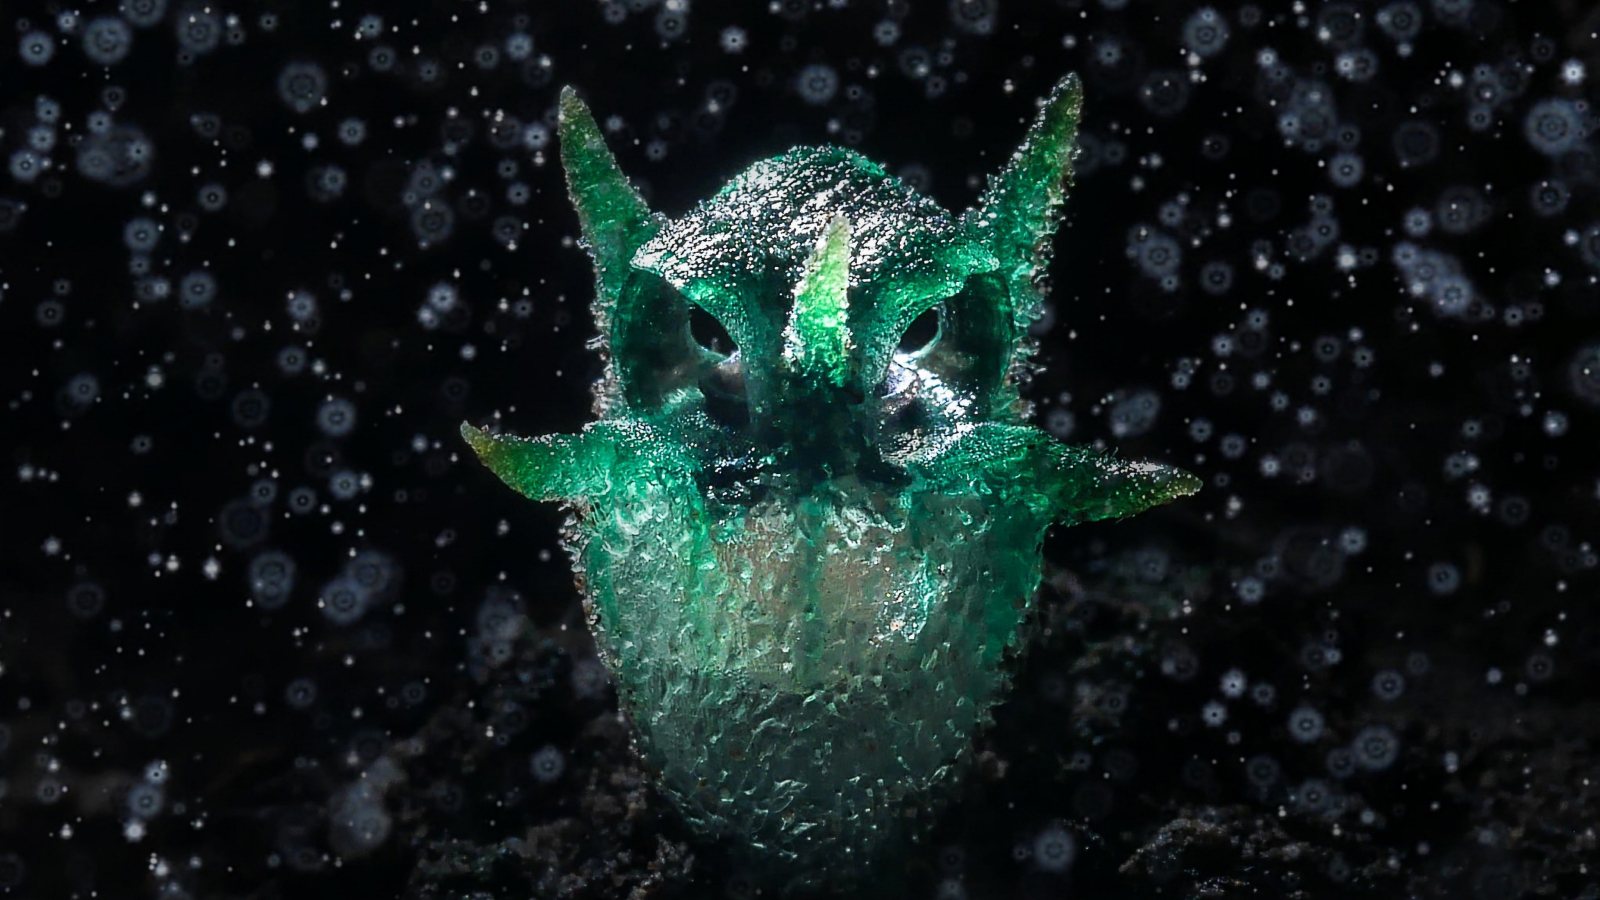 Mesmerizing photo shows weird, scowling parasitic plant that looks like a owl